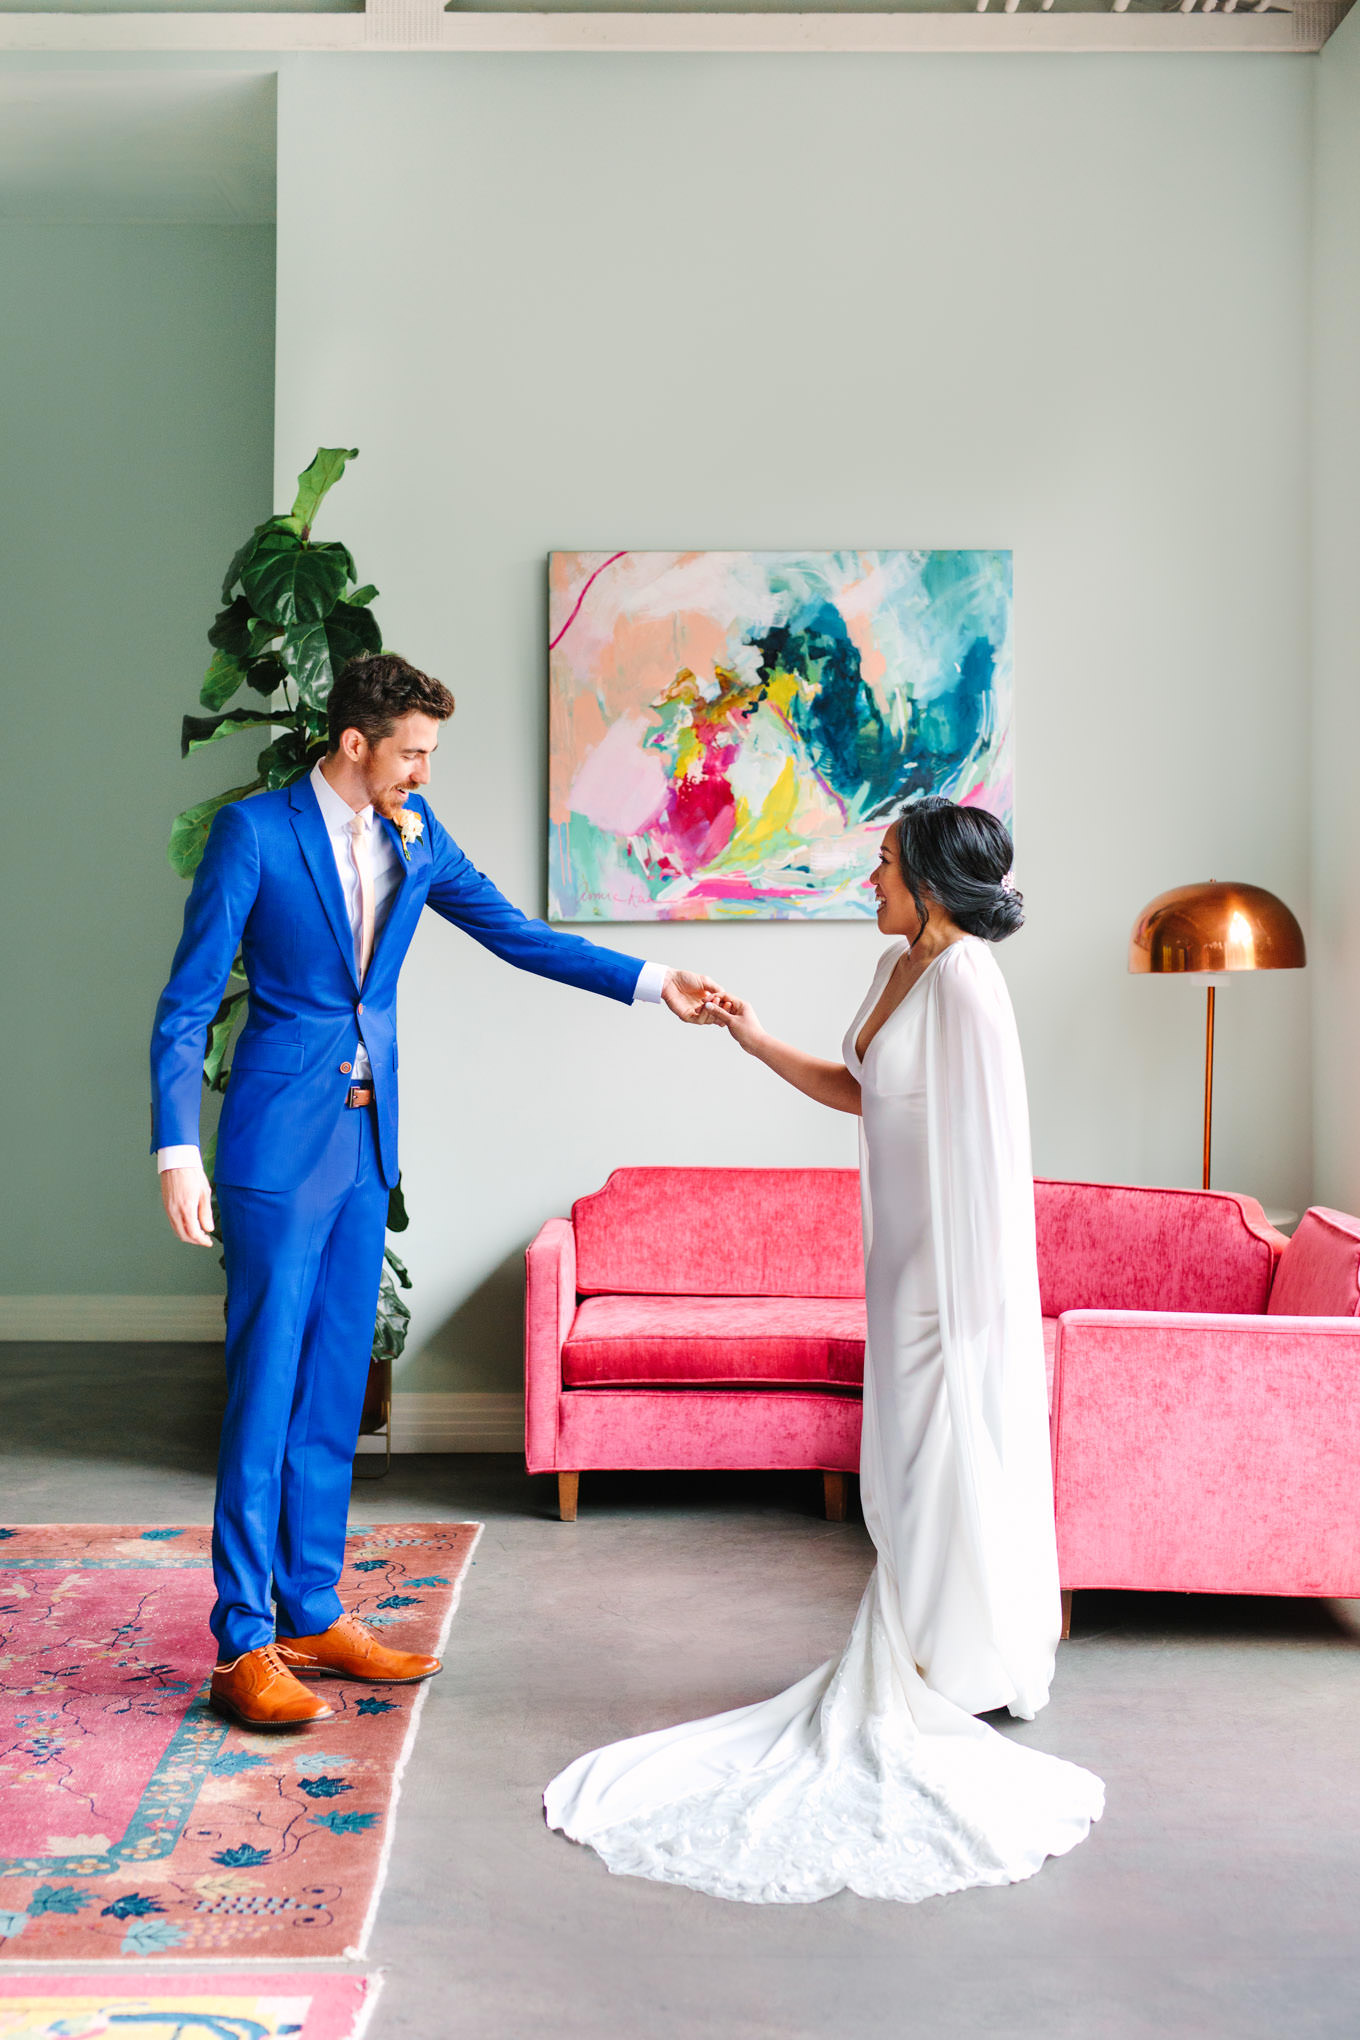 First look at Fig House wedding | Engagement, elopement, and wedding photography roundup of Mary Costa’s favorite images from 2020 | Colorful and elevated photography for fun-loving couples in Southern California | #2020wedding #elopement #weddingphoto #weddingphotography   Source: Mary Costa Photography | Los Angeles